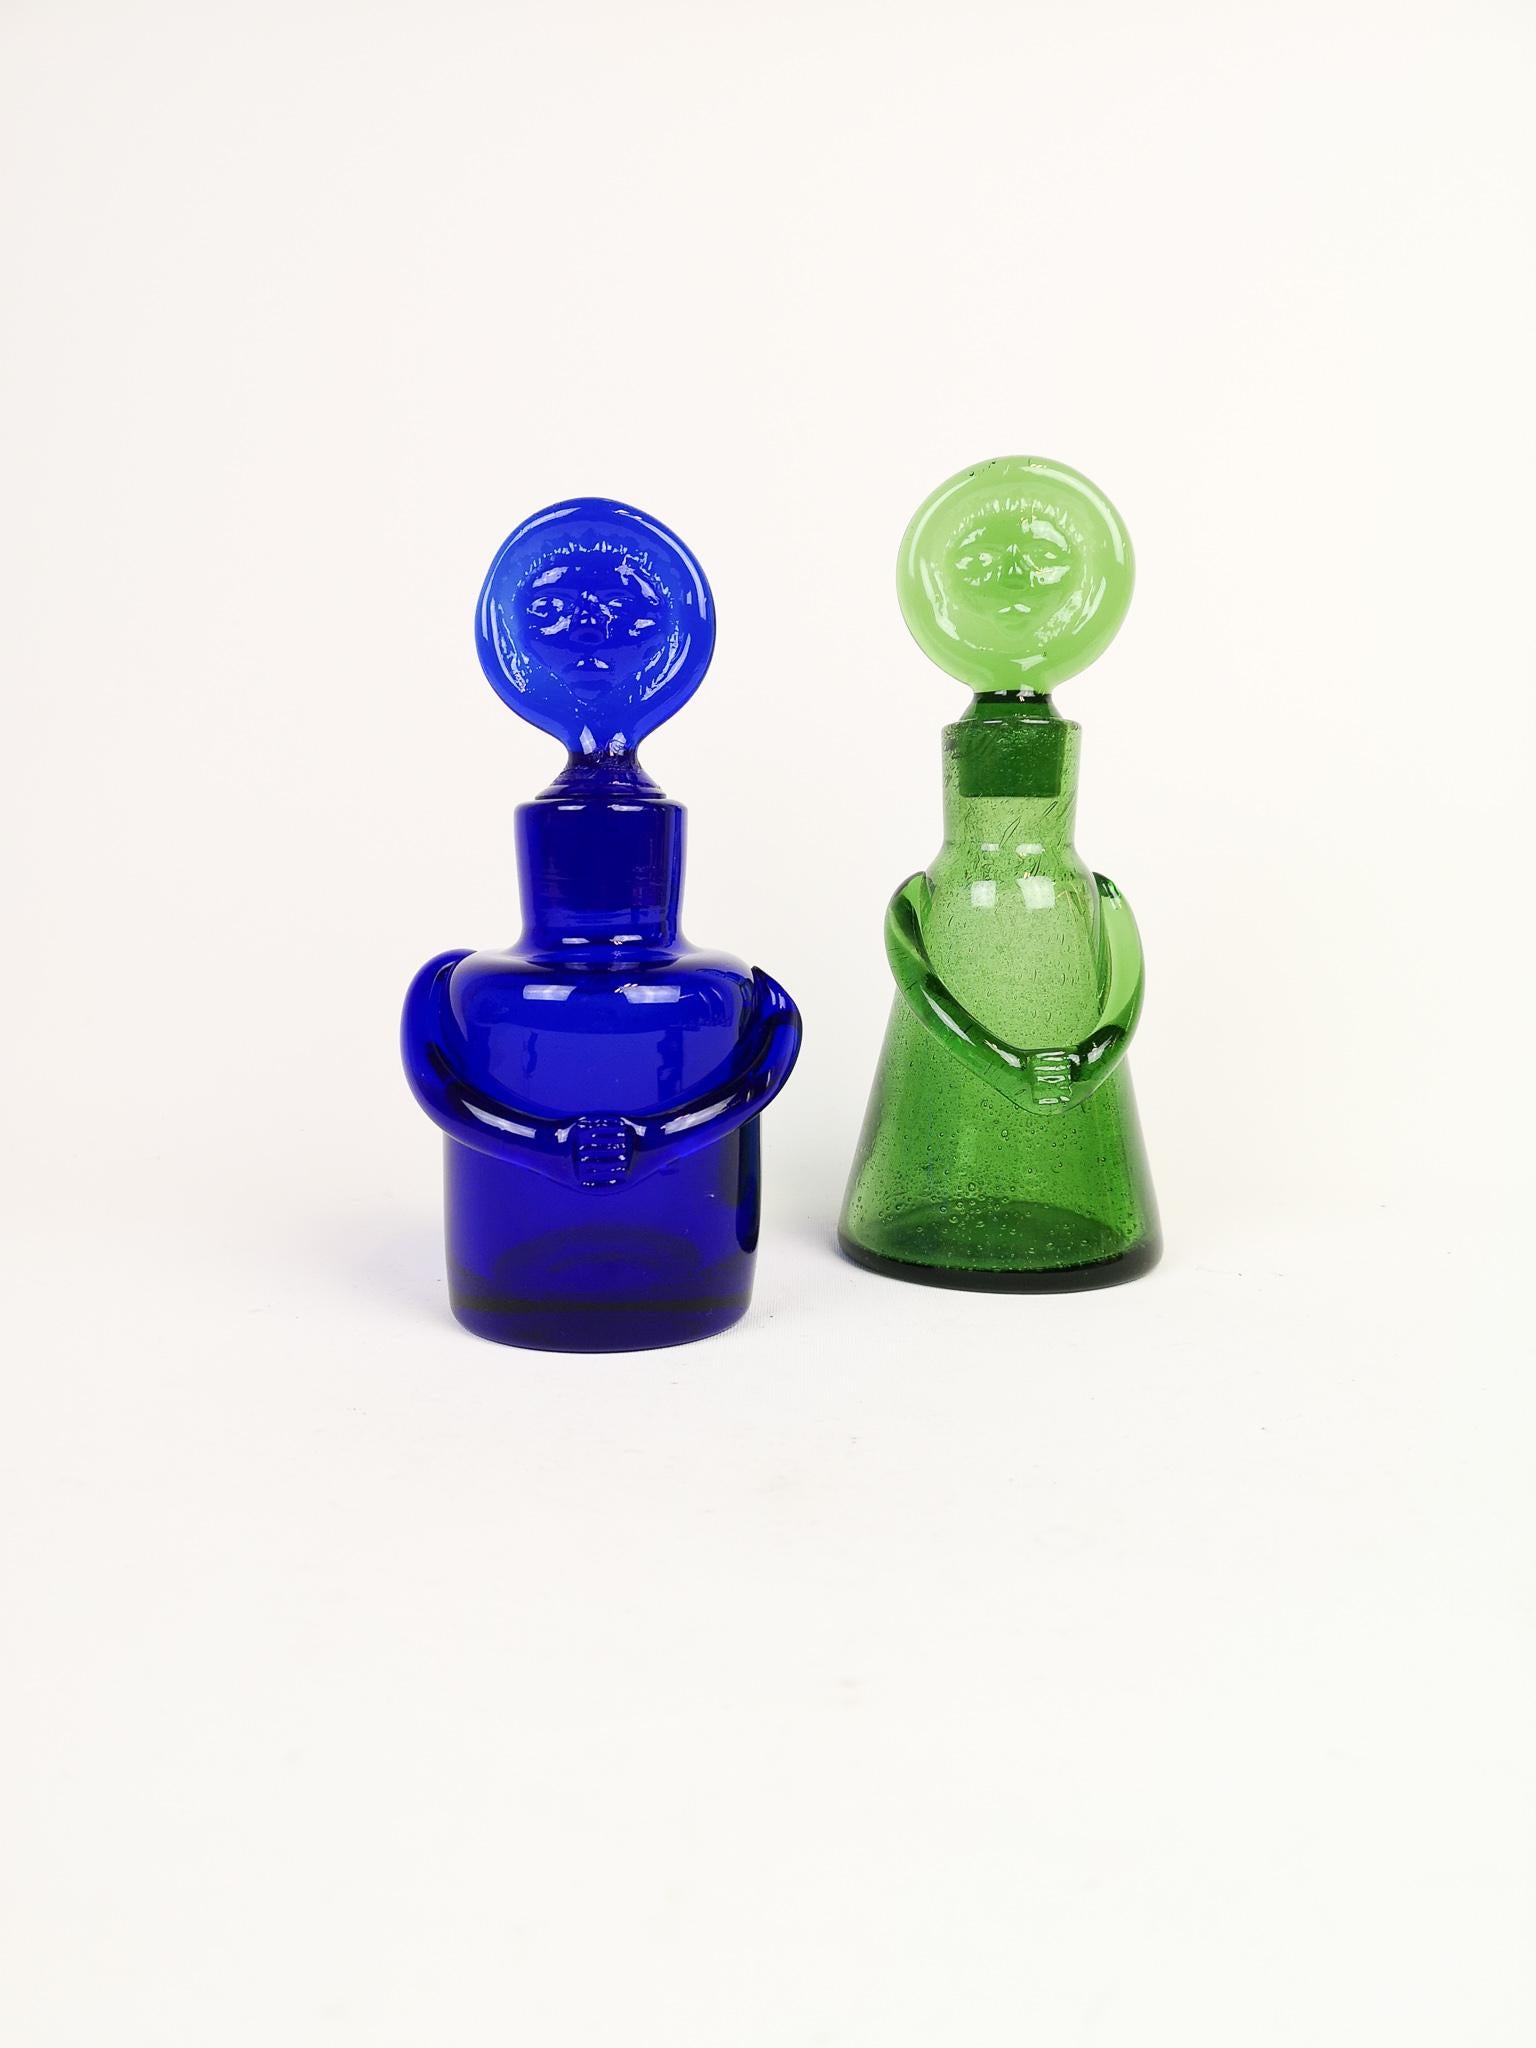 These bottles were made at Boda and designed by Erik Höglund in Sweden, 1960s.
They are both made in an artistic funny way, with that wonderful color signature from Höglund. 

Very good condition.

Measures: Green H 21, D 9 cm. Blue H 19, D